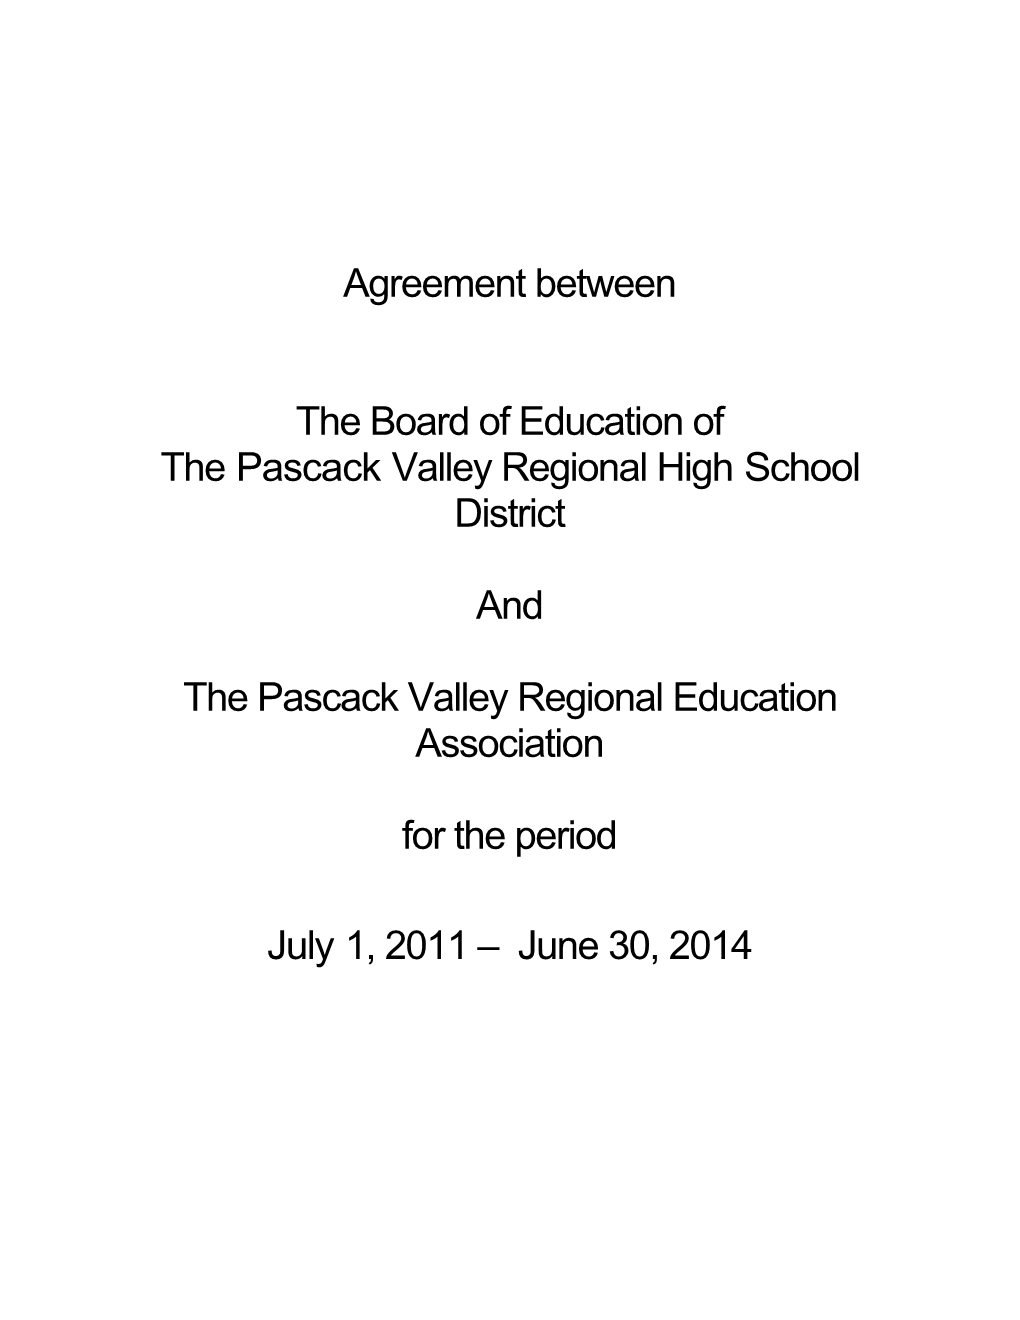 The Pascack Valley Regional High School District